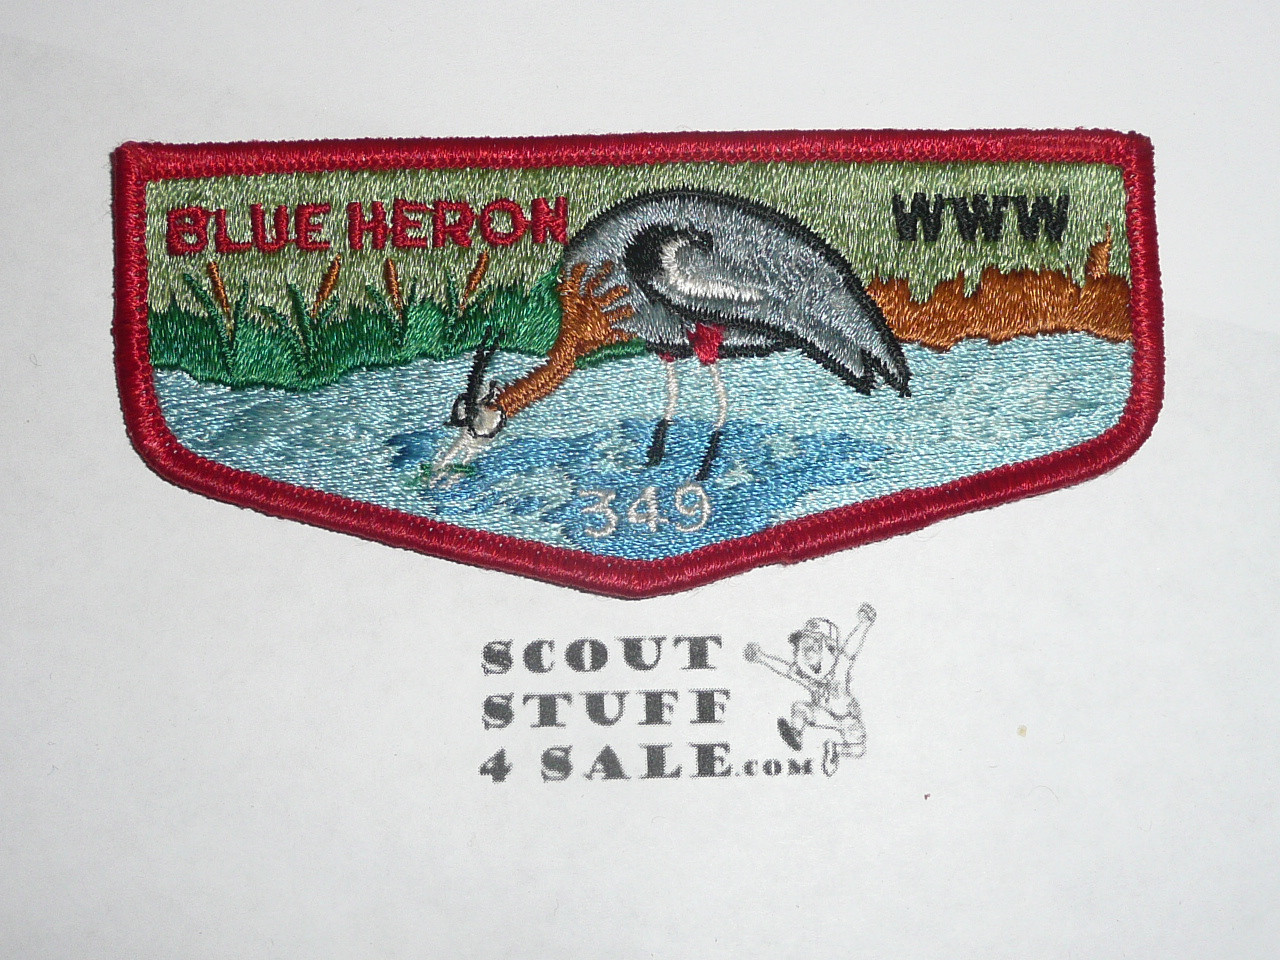 Order of the Arrow Lodge #349 Blue Heron s1 Flap Patch